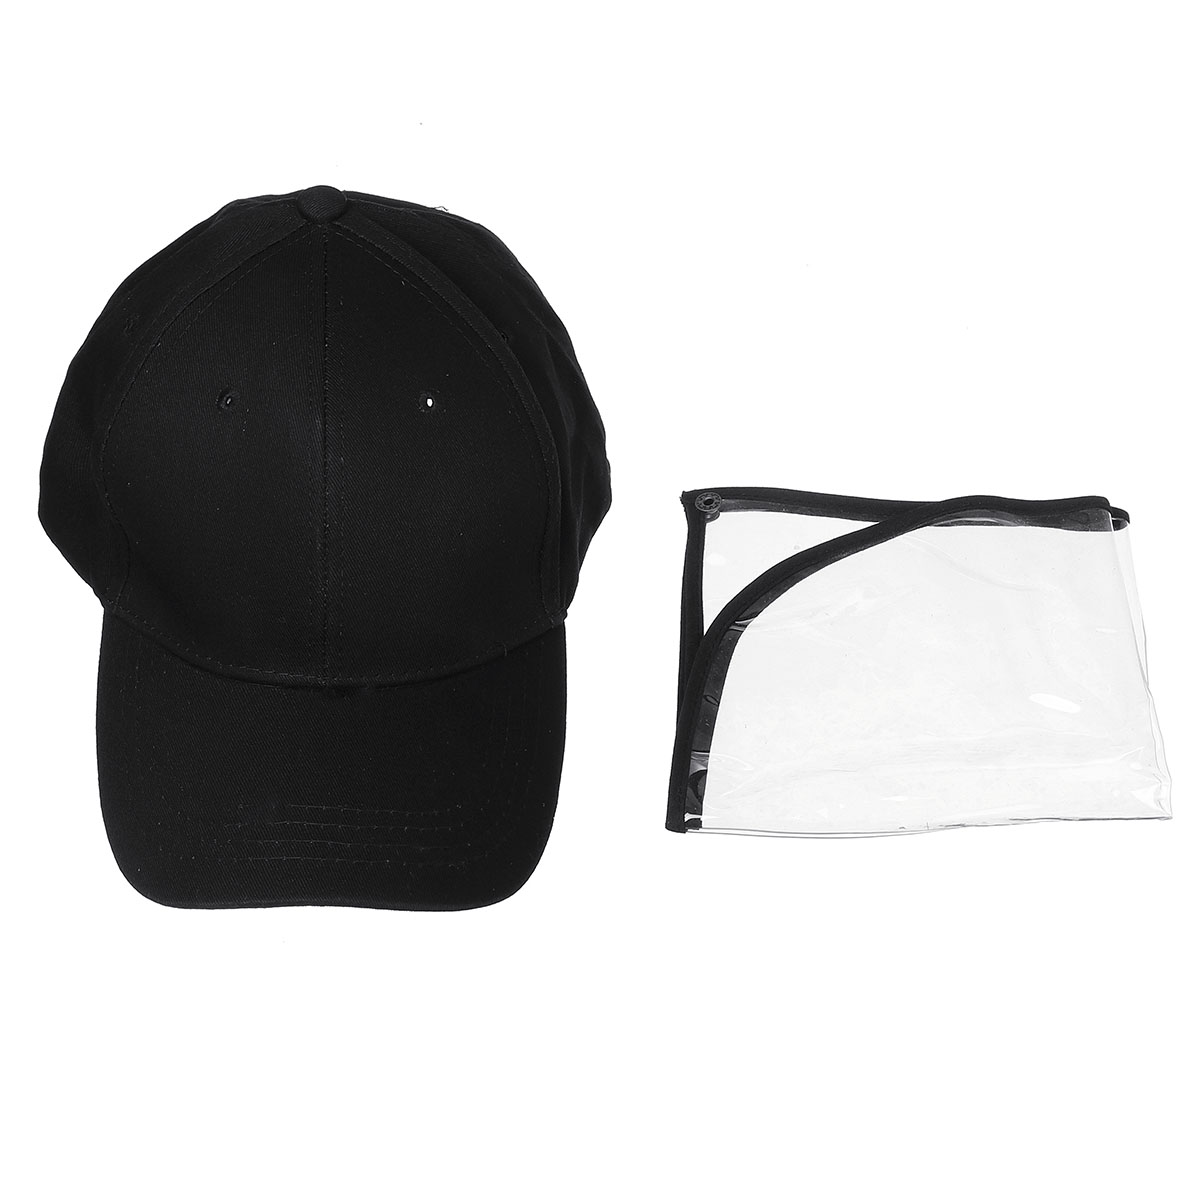 Clear-Full-Face-Hat-Waterproof-Cover-Mask-Cap-Shield-Protective-Anti-spitting-1659895-3